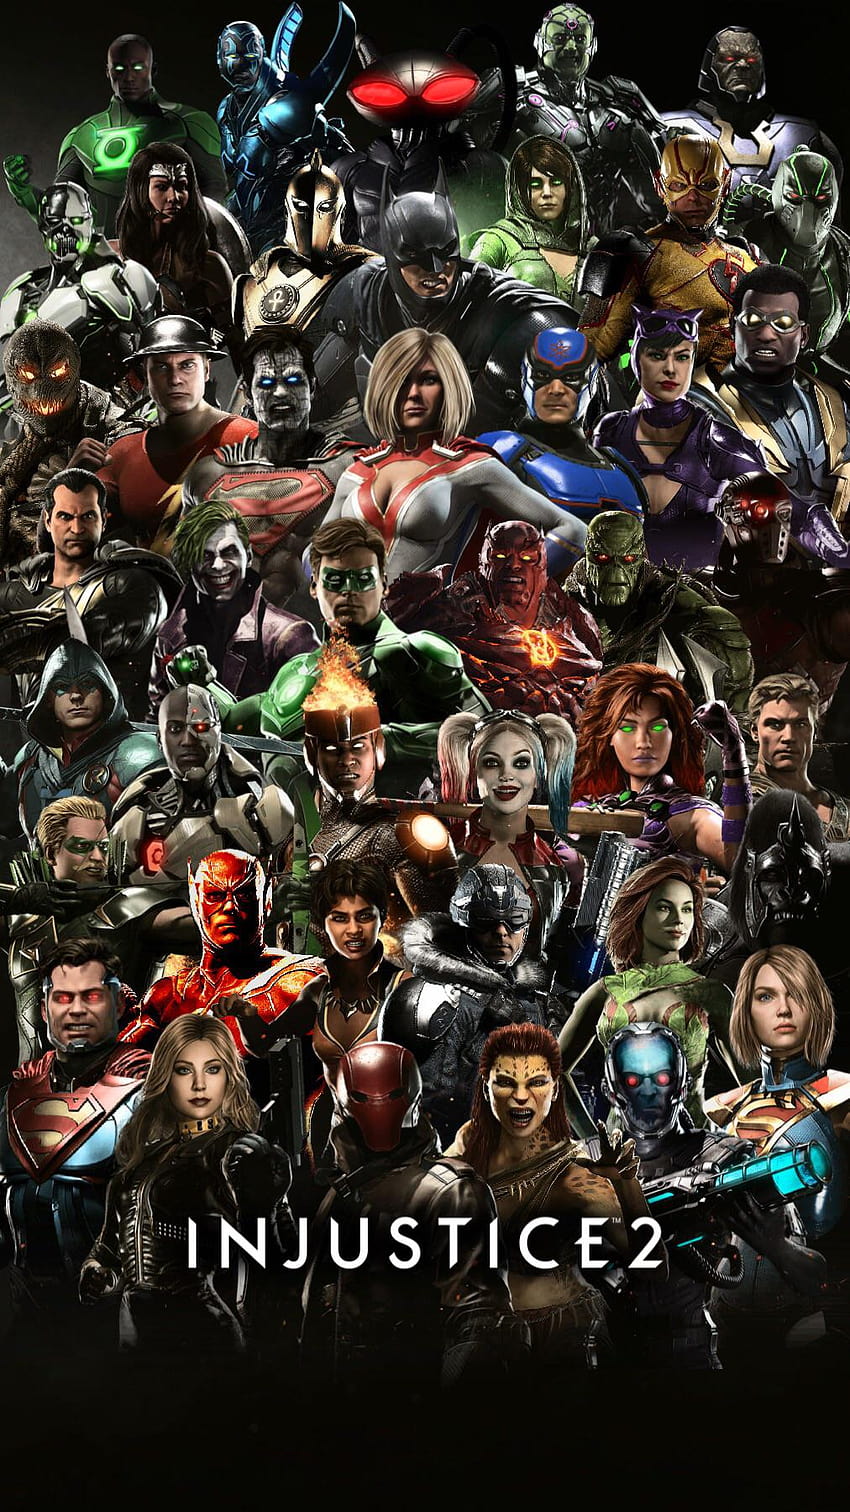 Per some people's rightful concerns that Bane wasn't included the last time, I edited the poster to replace Hellboy with Bane, all outside characters excluded, for example Sub, injustice 2 bane HD phone wallpaper